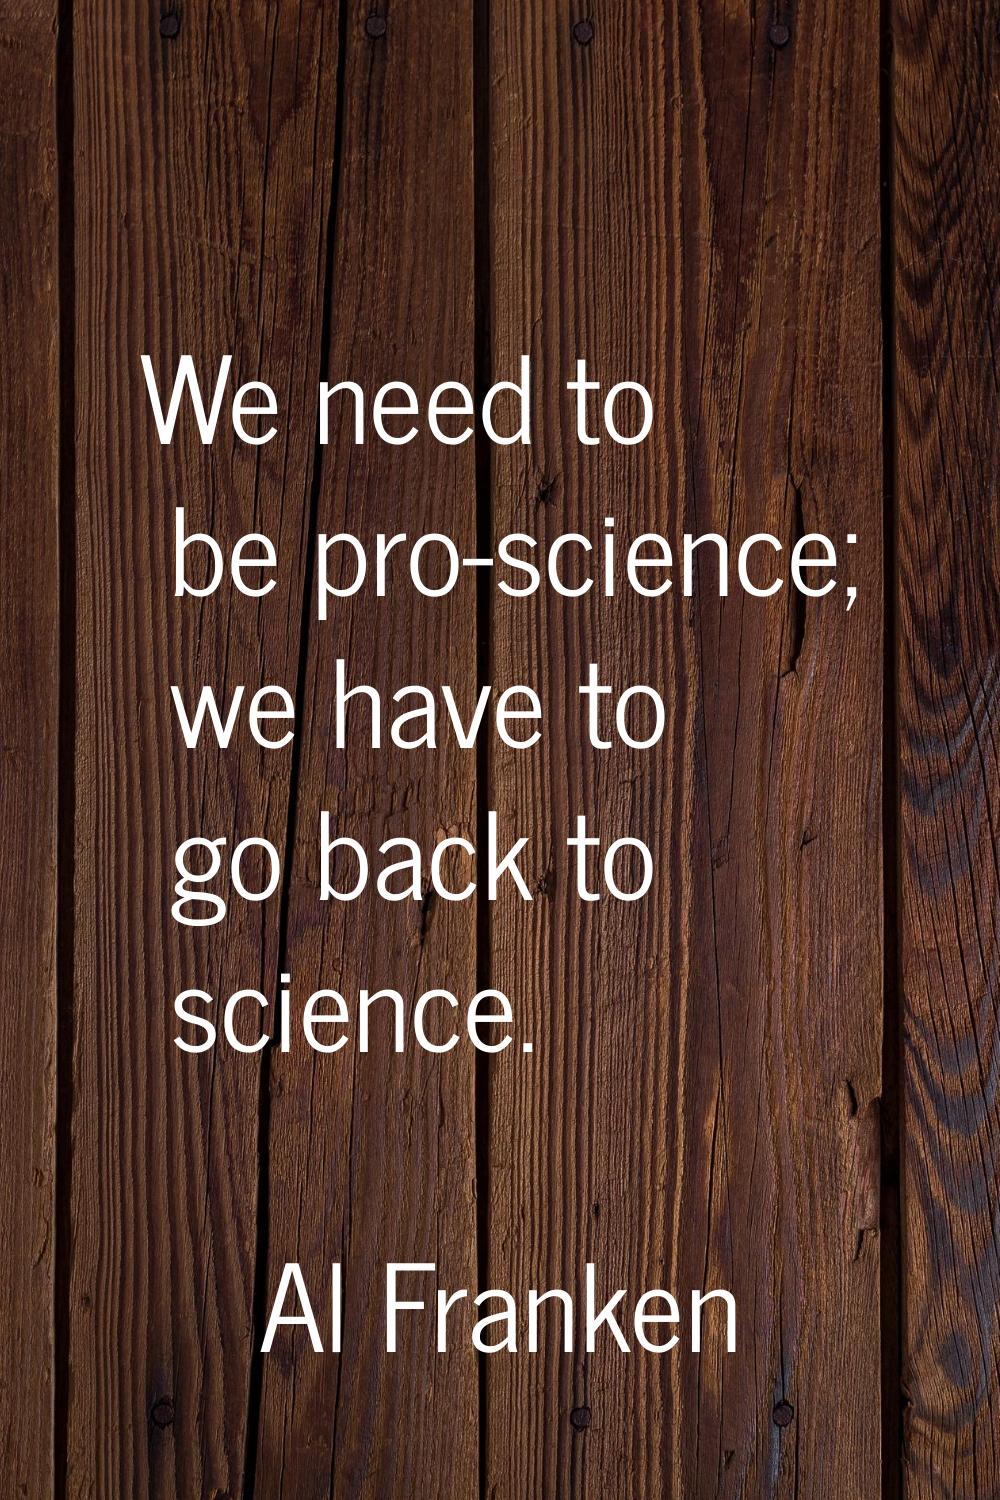 We need to be pro-science; we have to go back to science.